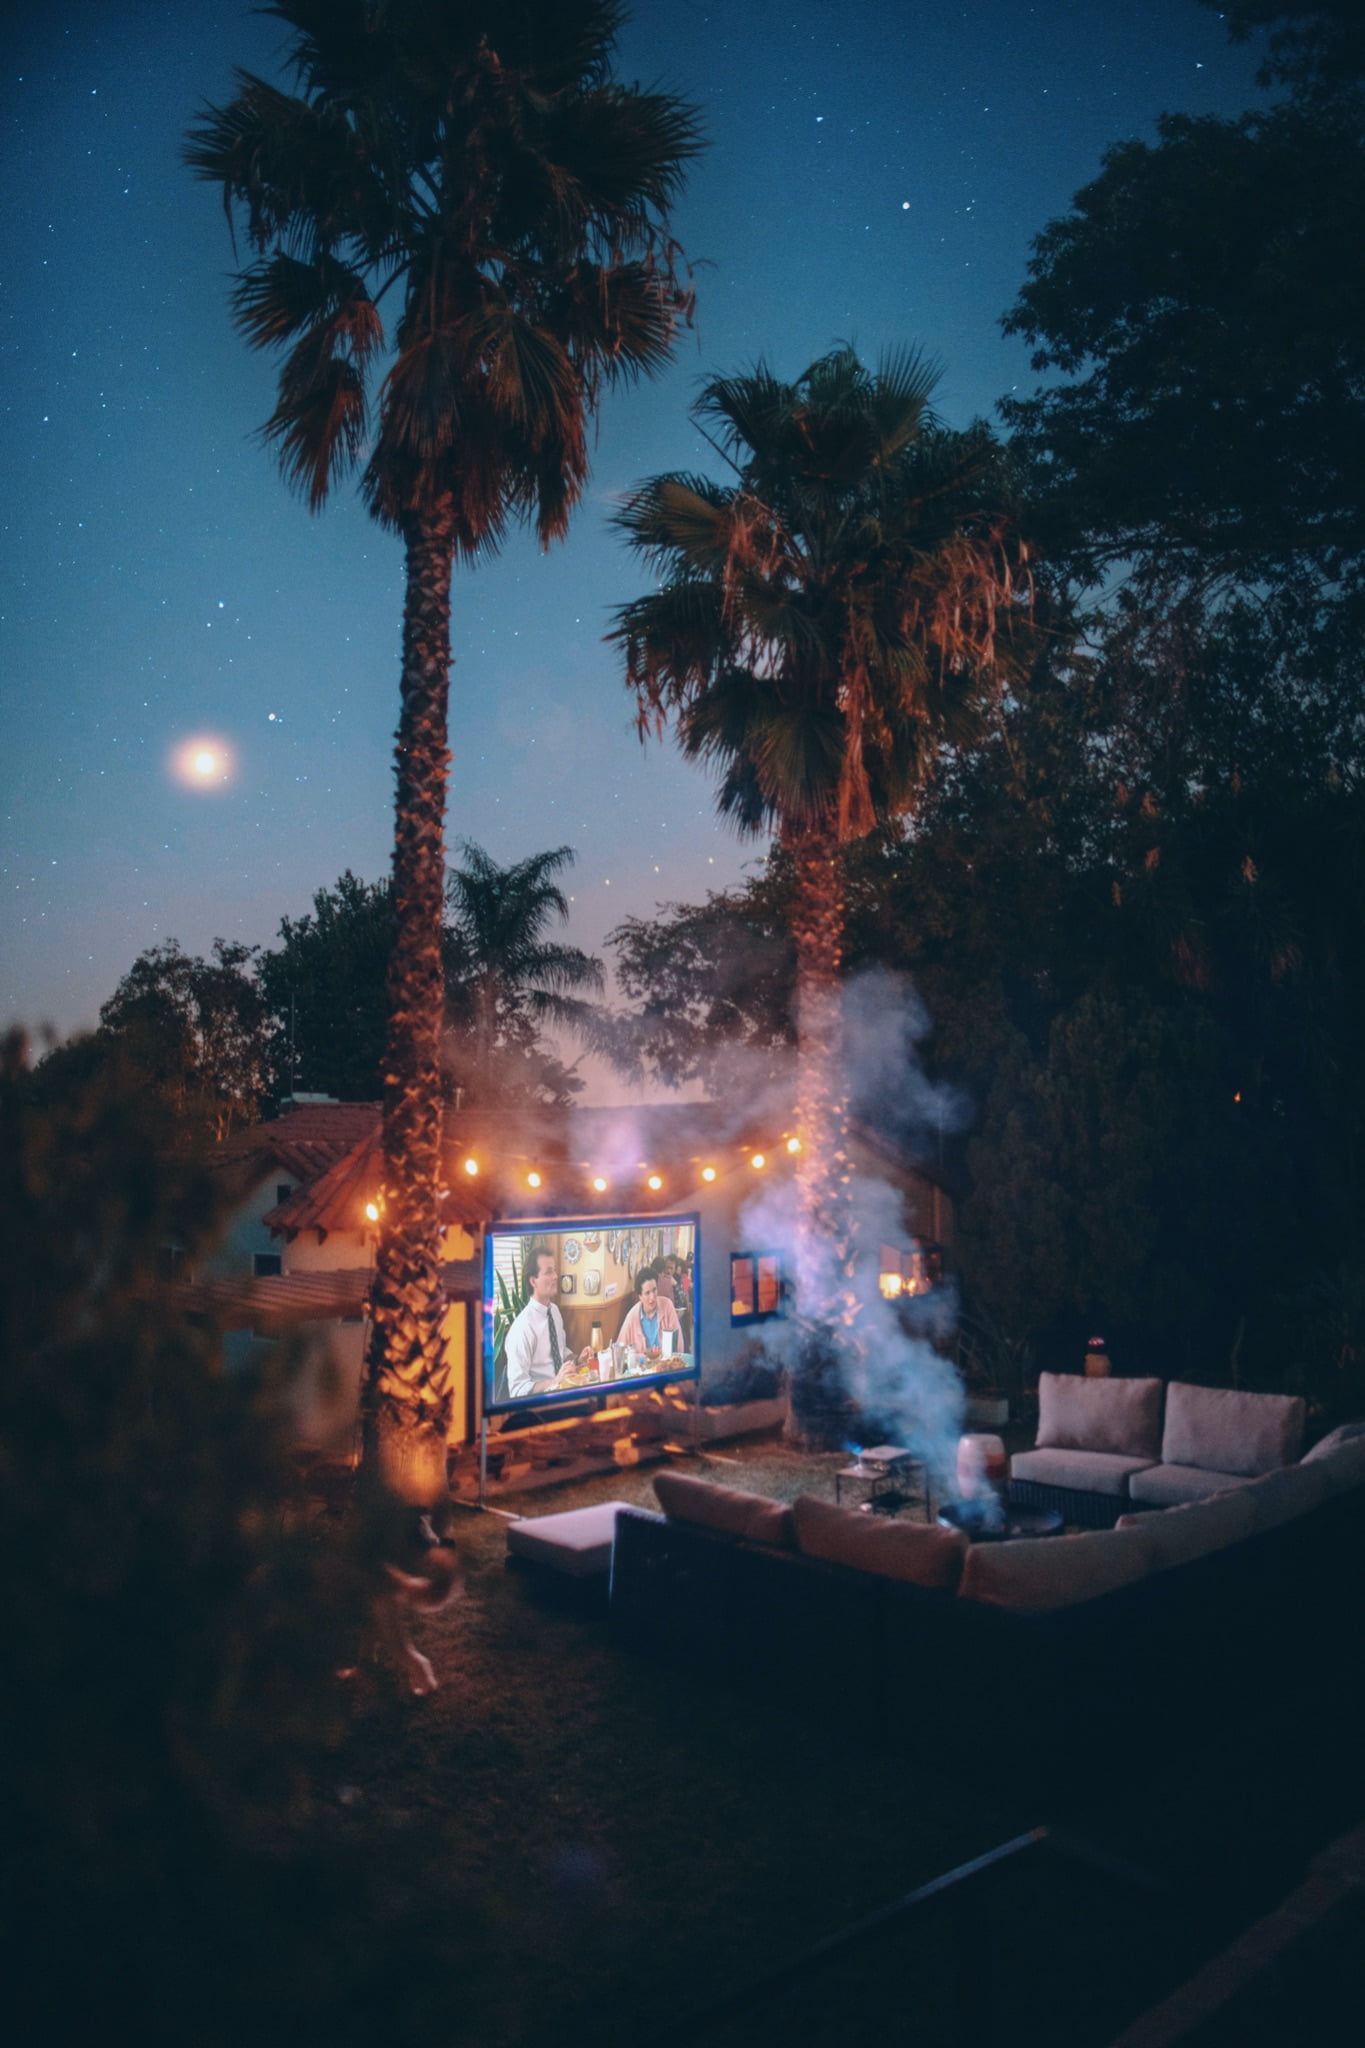 Summer movie night at home backyard using portable projector